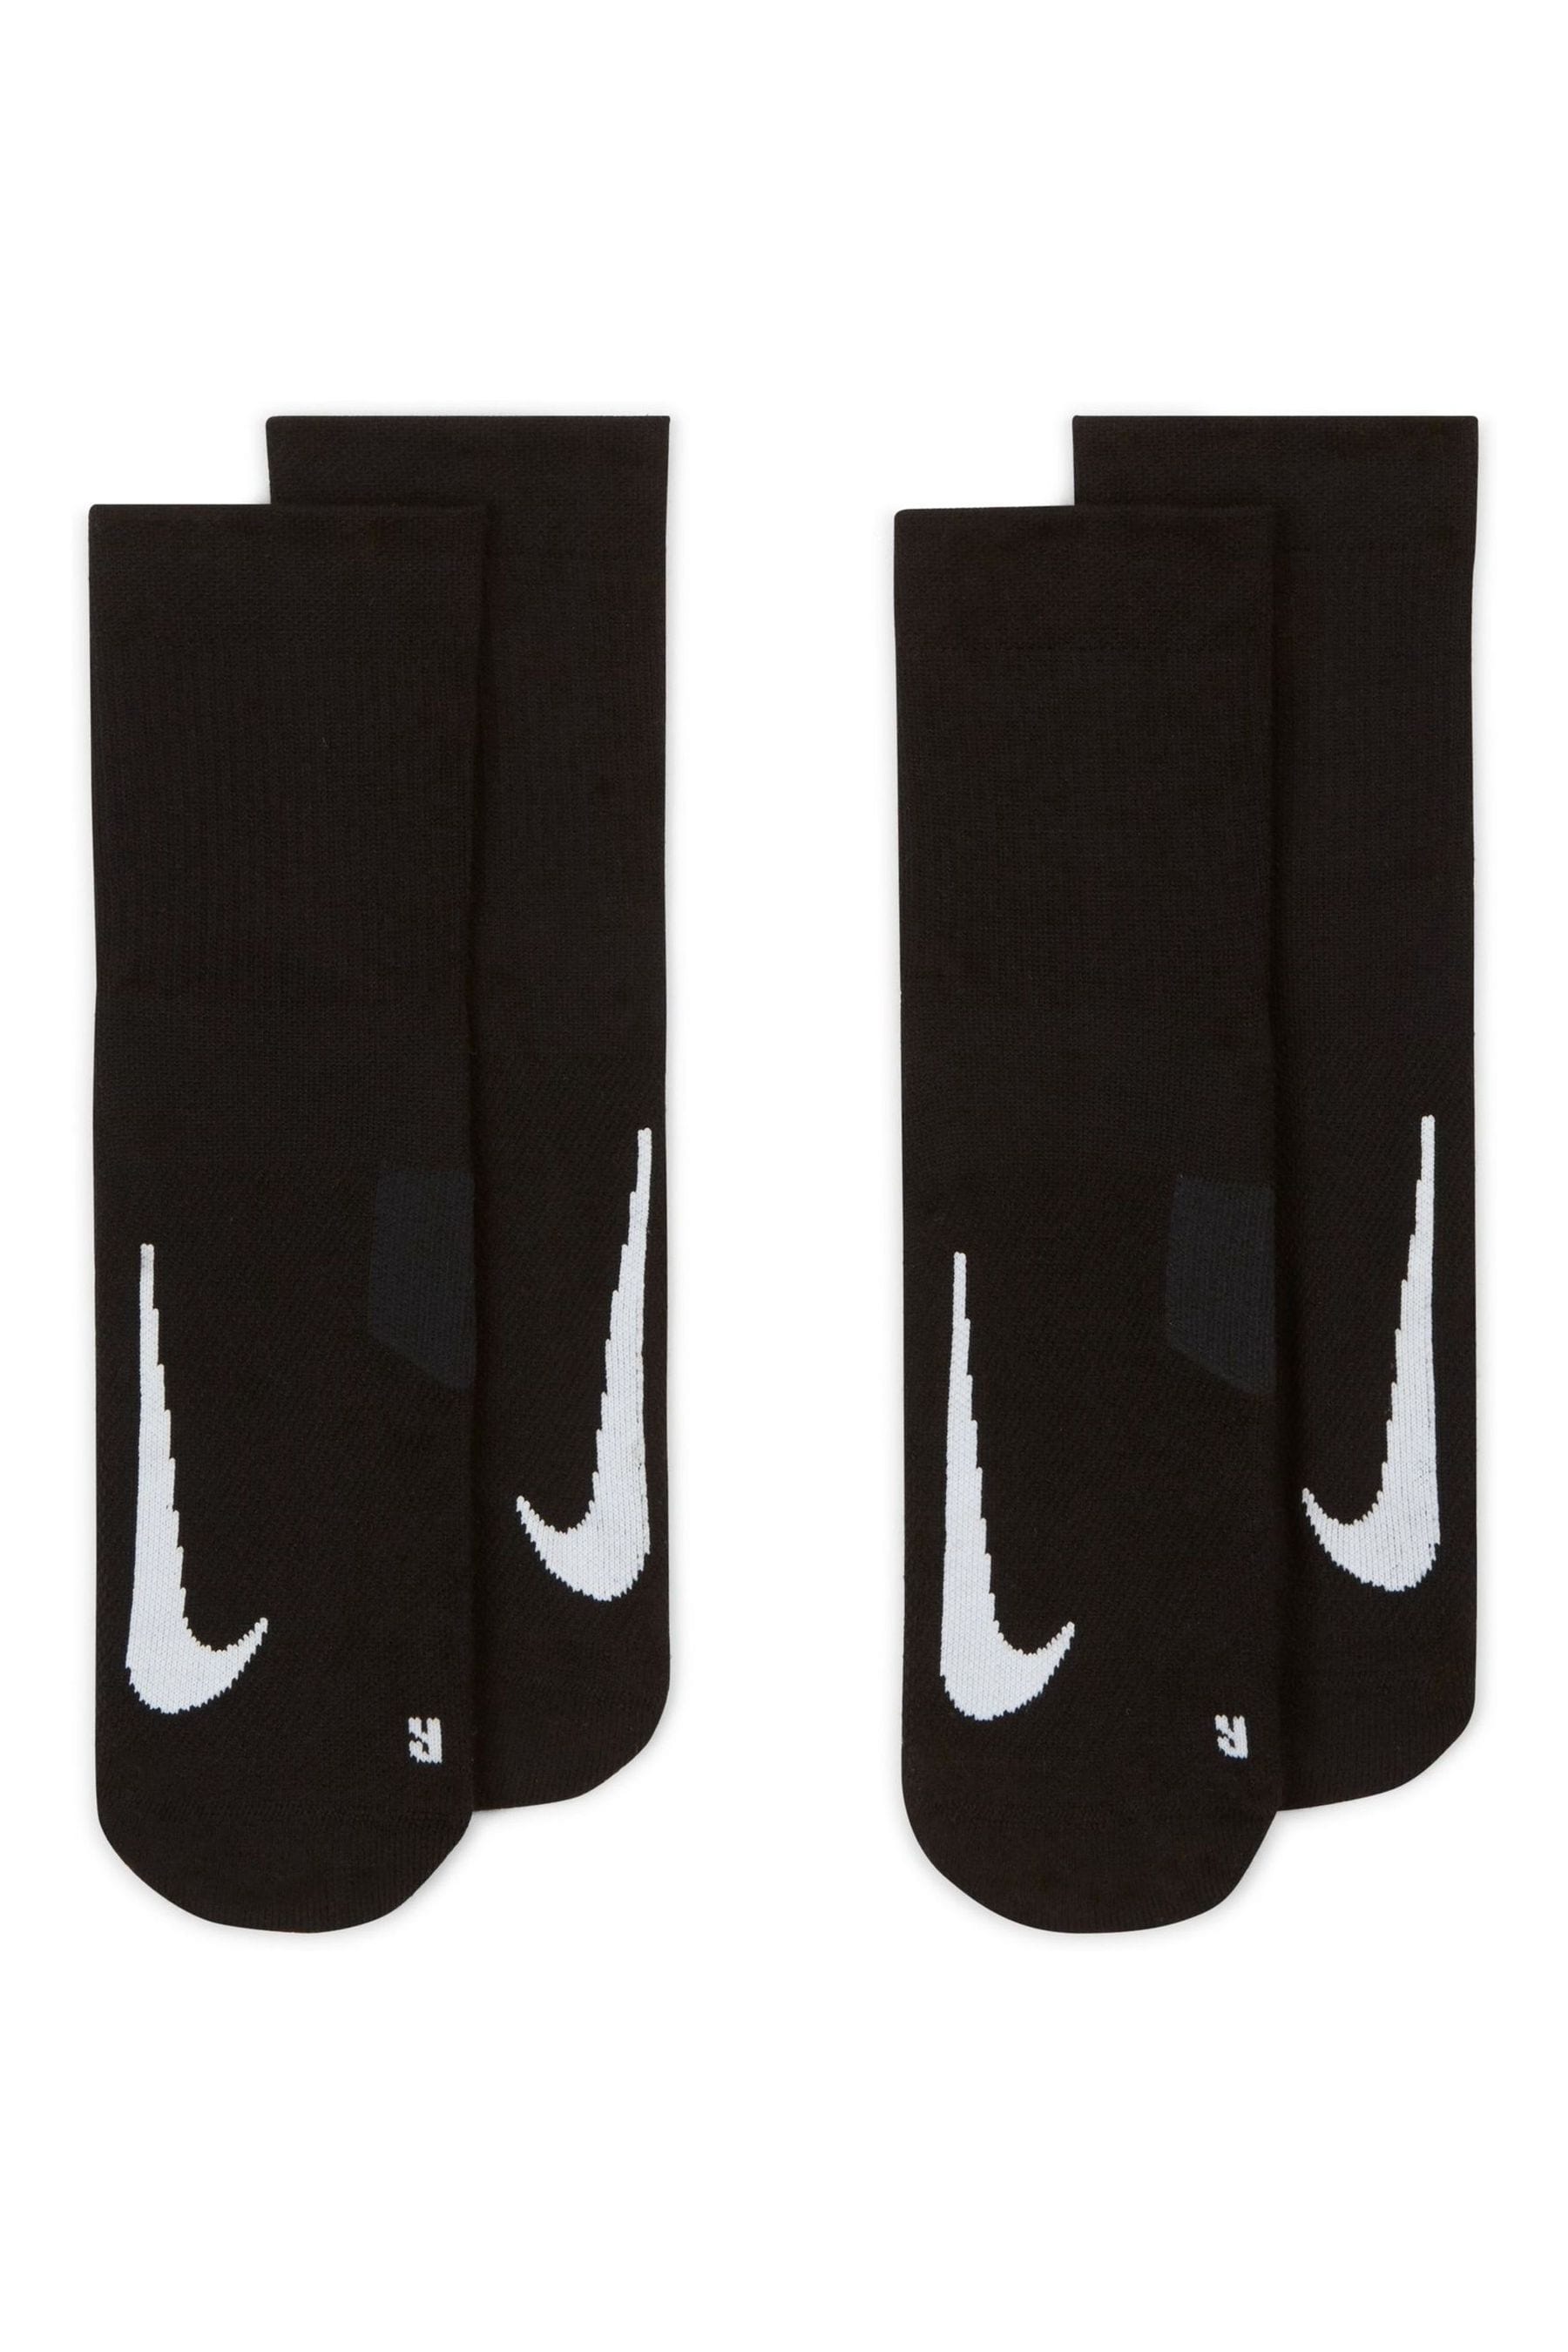 Buy Nike Black Running Ankle Socks Two Pack from the Next UK online shop